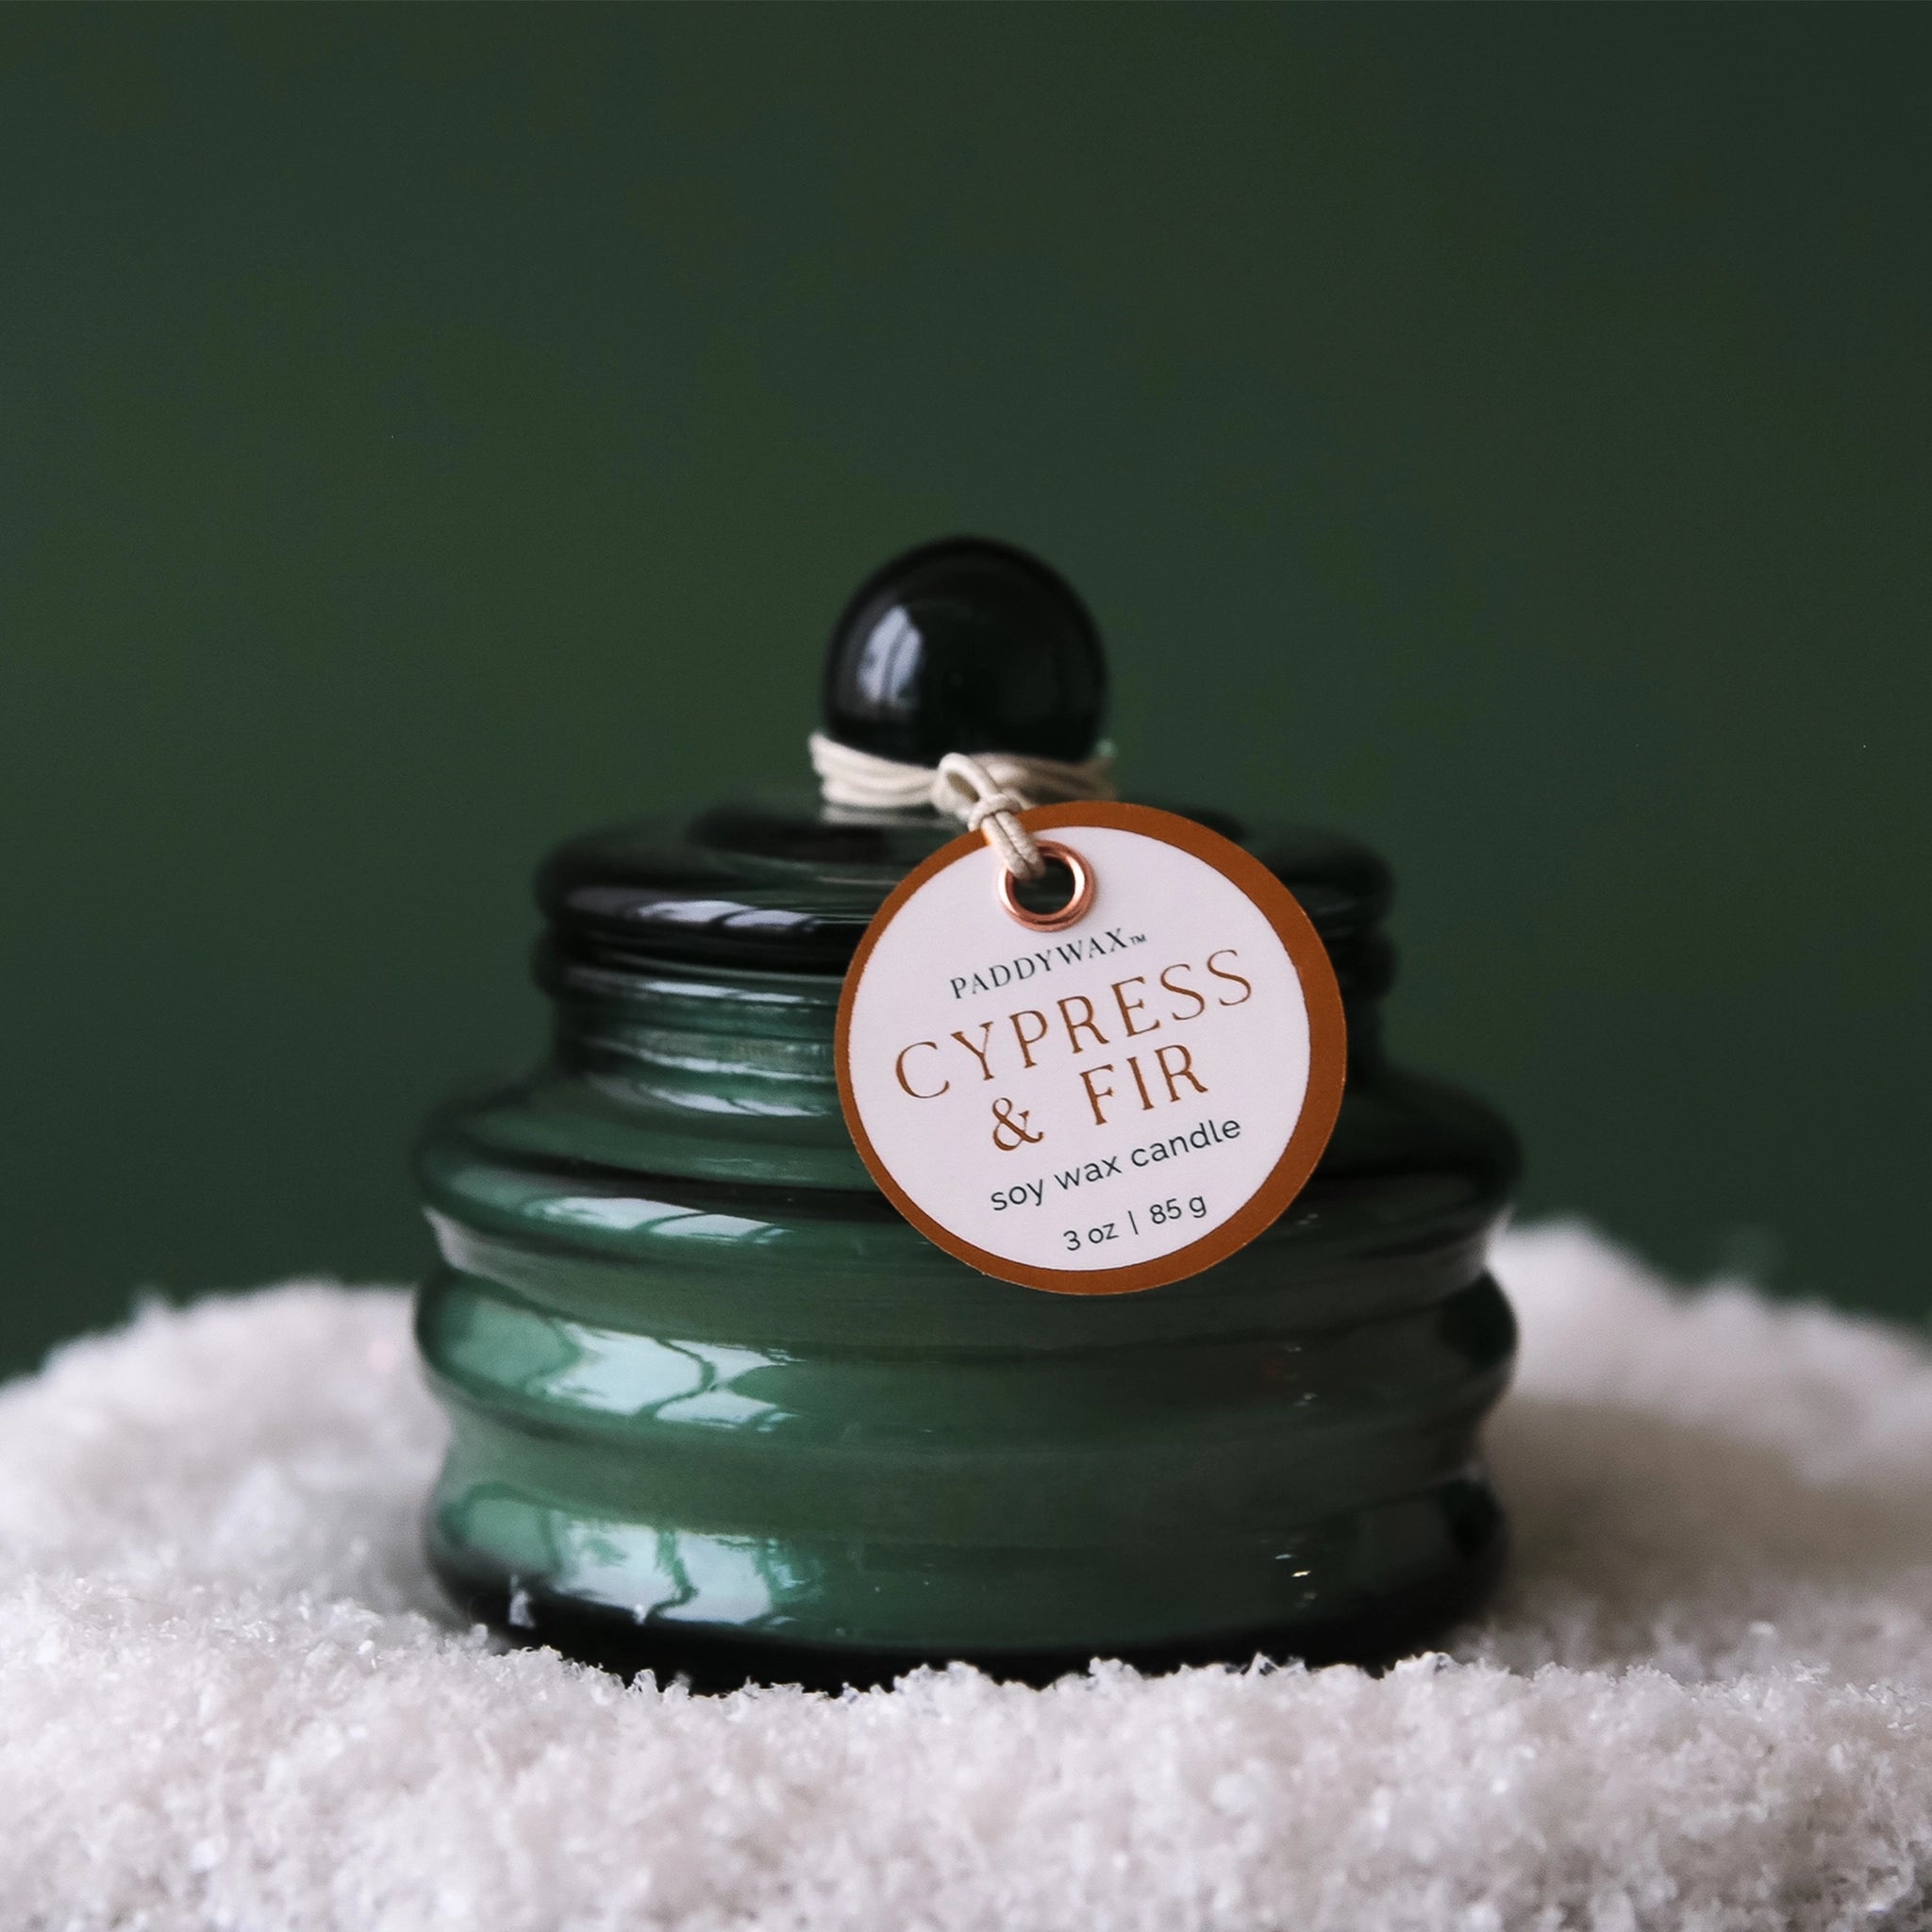 On a peachy background is a dark green glass candle with a coordinating lid and a round label tag that reads, "Cypress & Fir Soy Wax Candle".